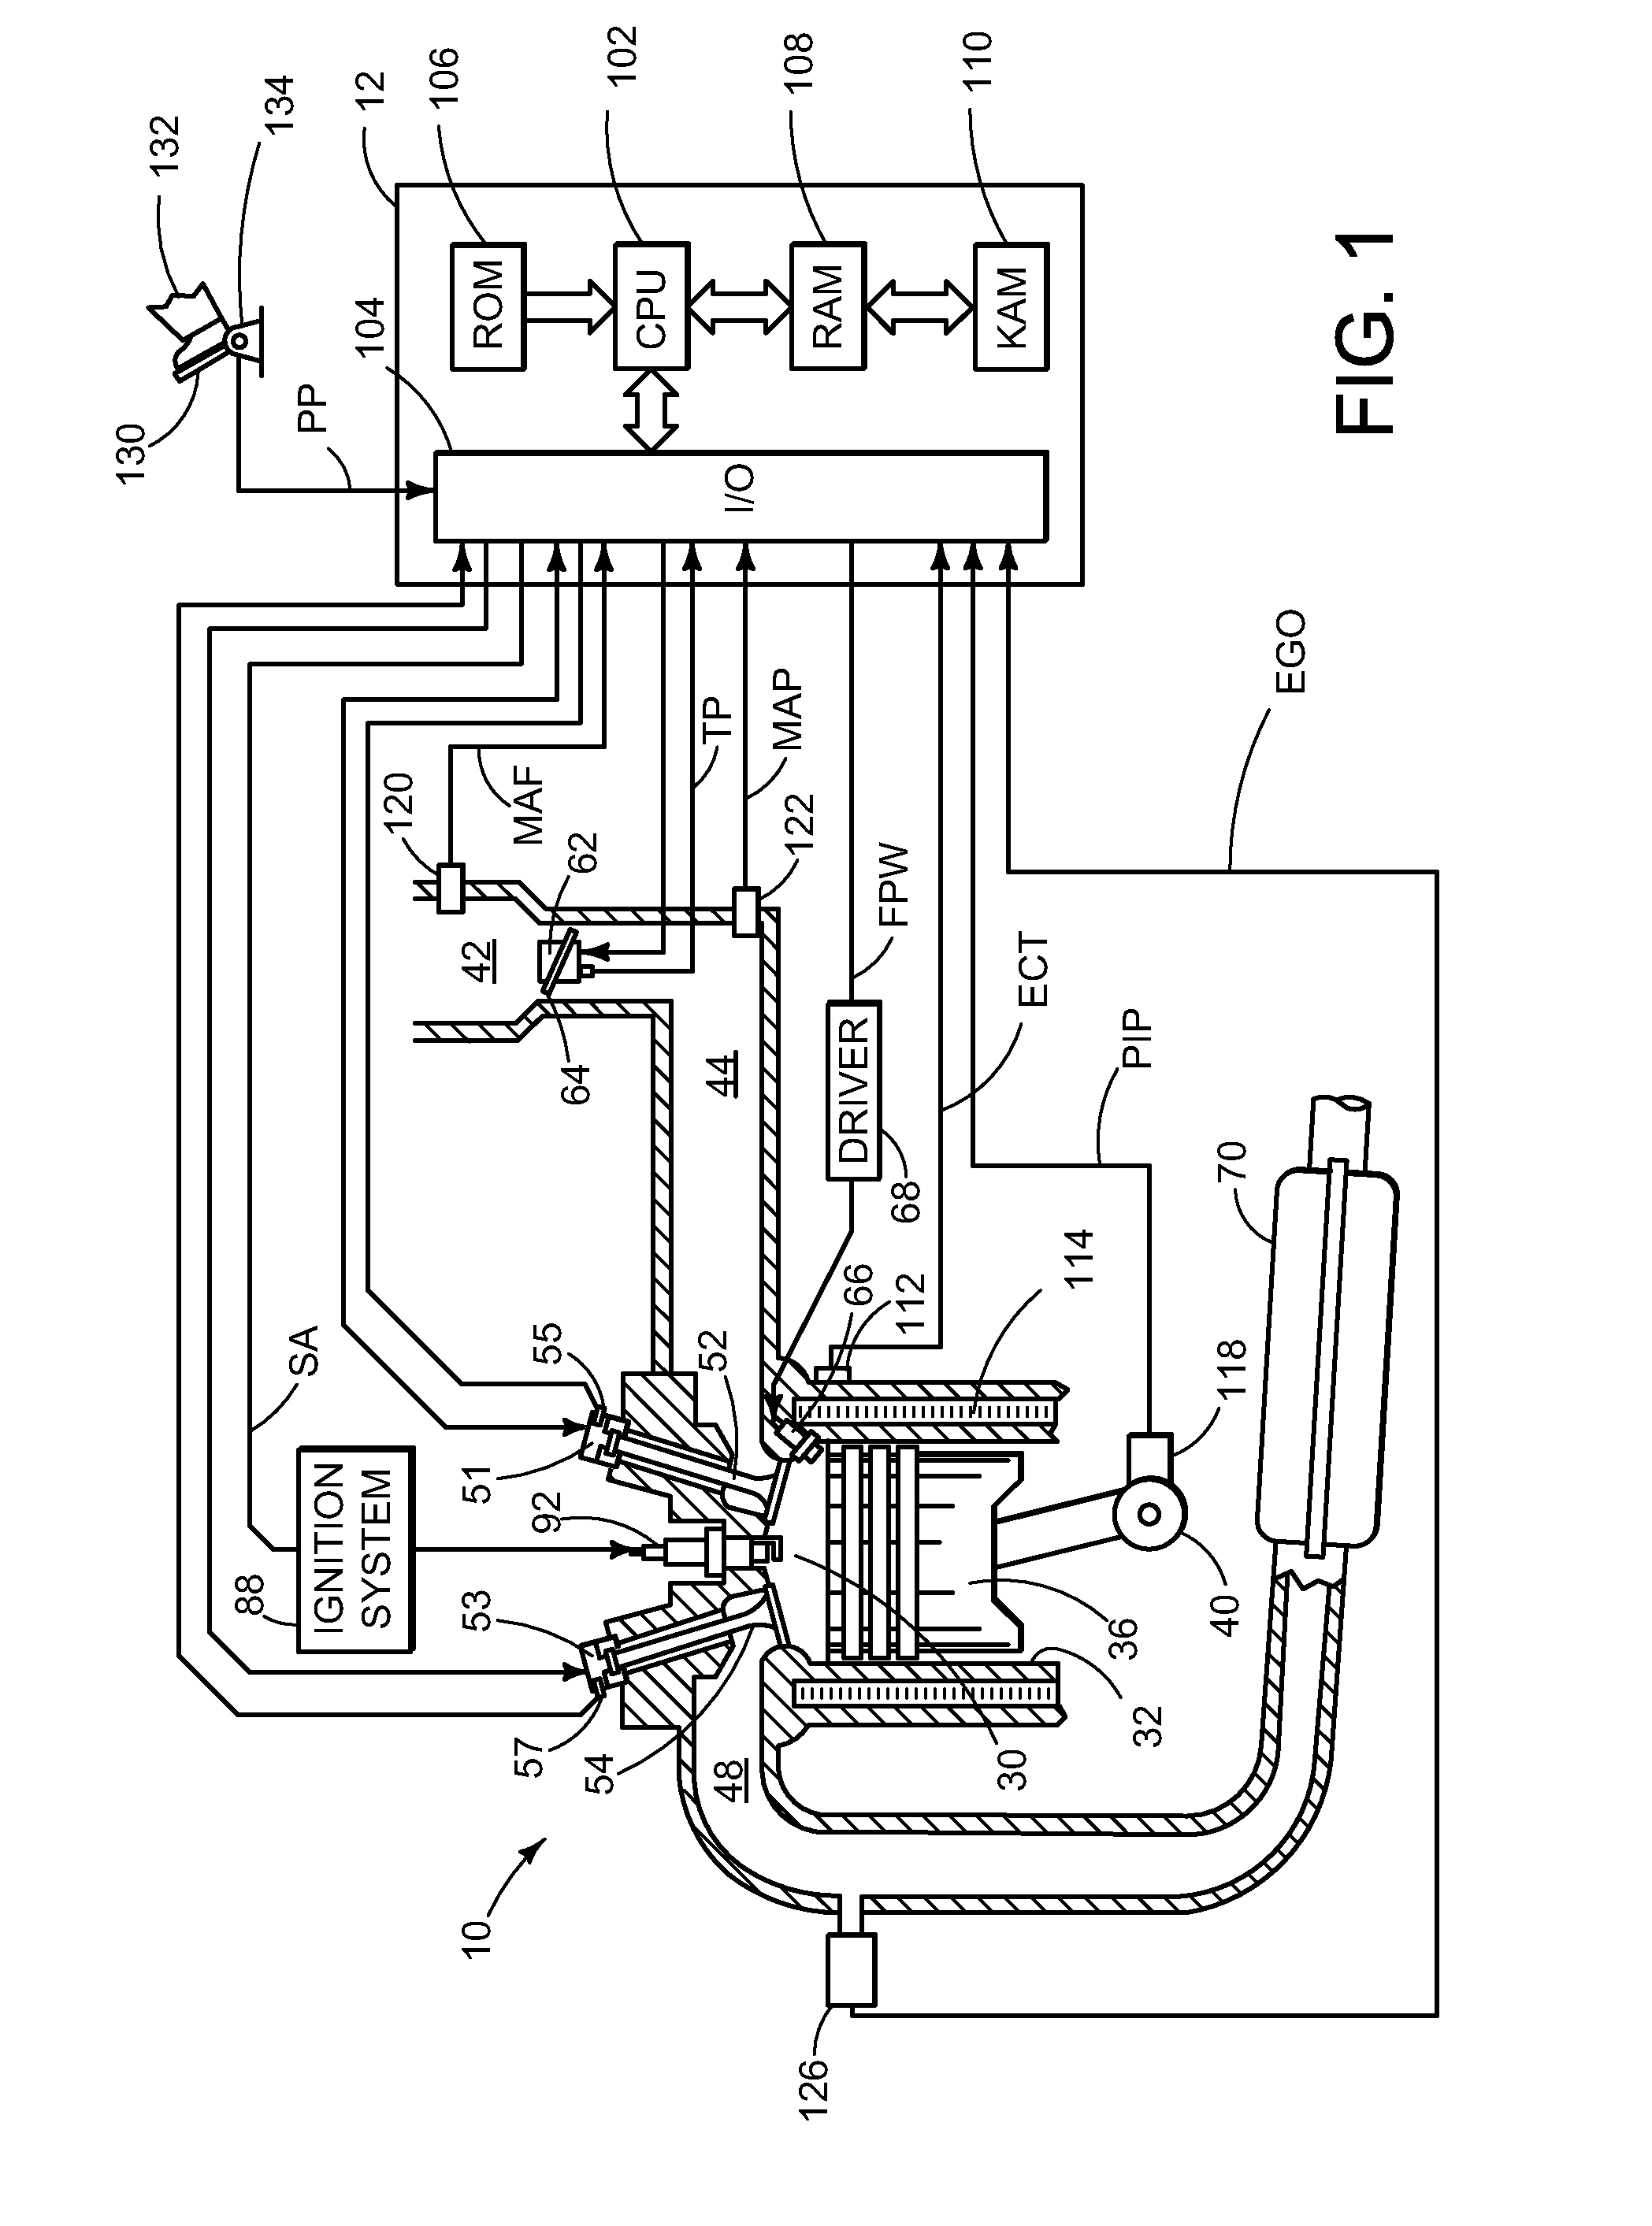 Control Strategy for Multi-Mode Vehicle Propulsion System